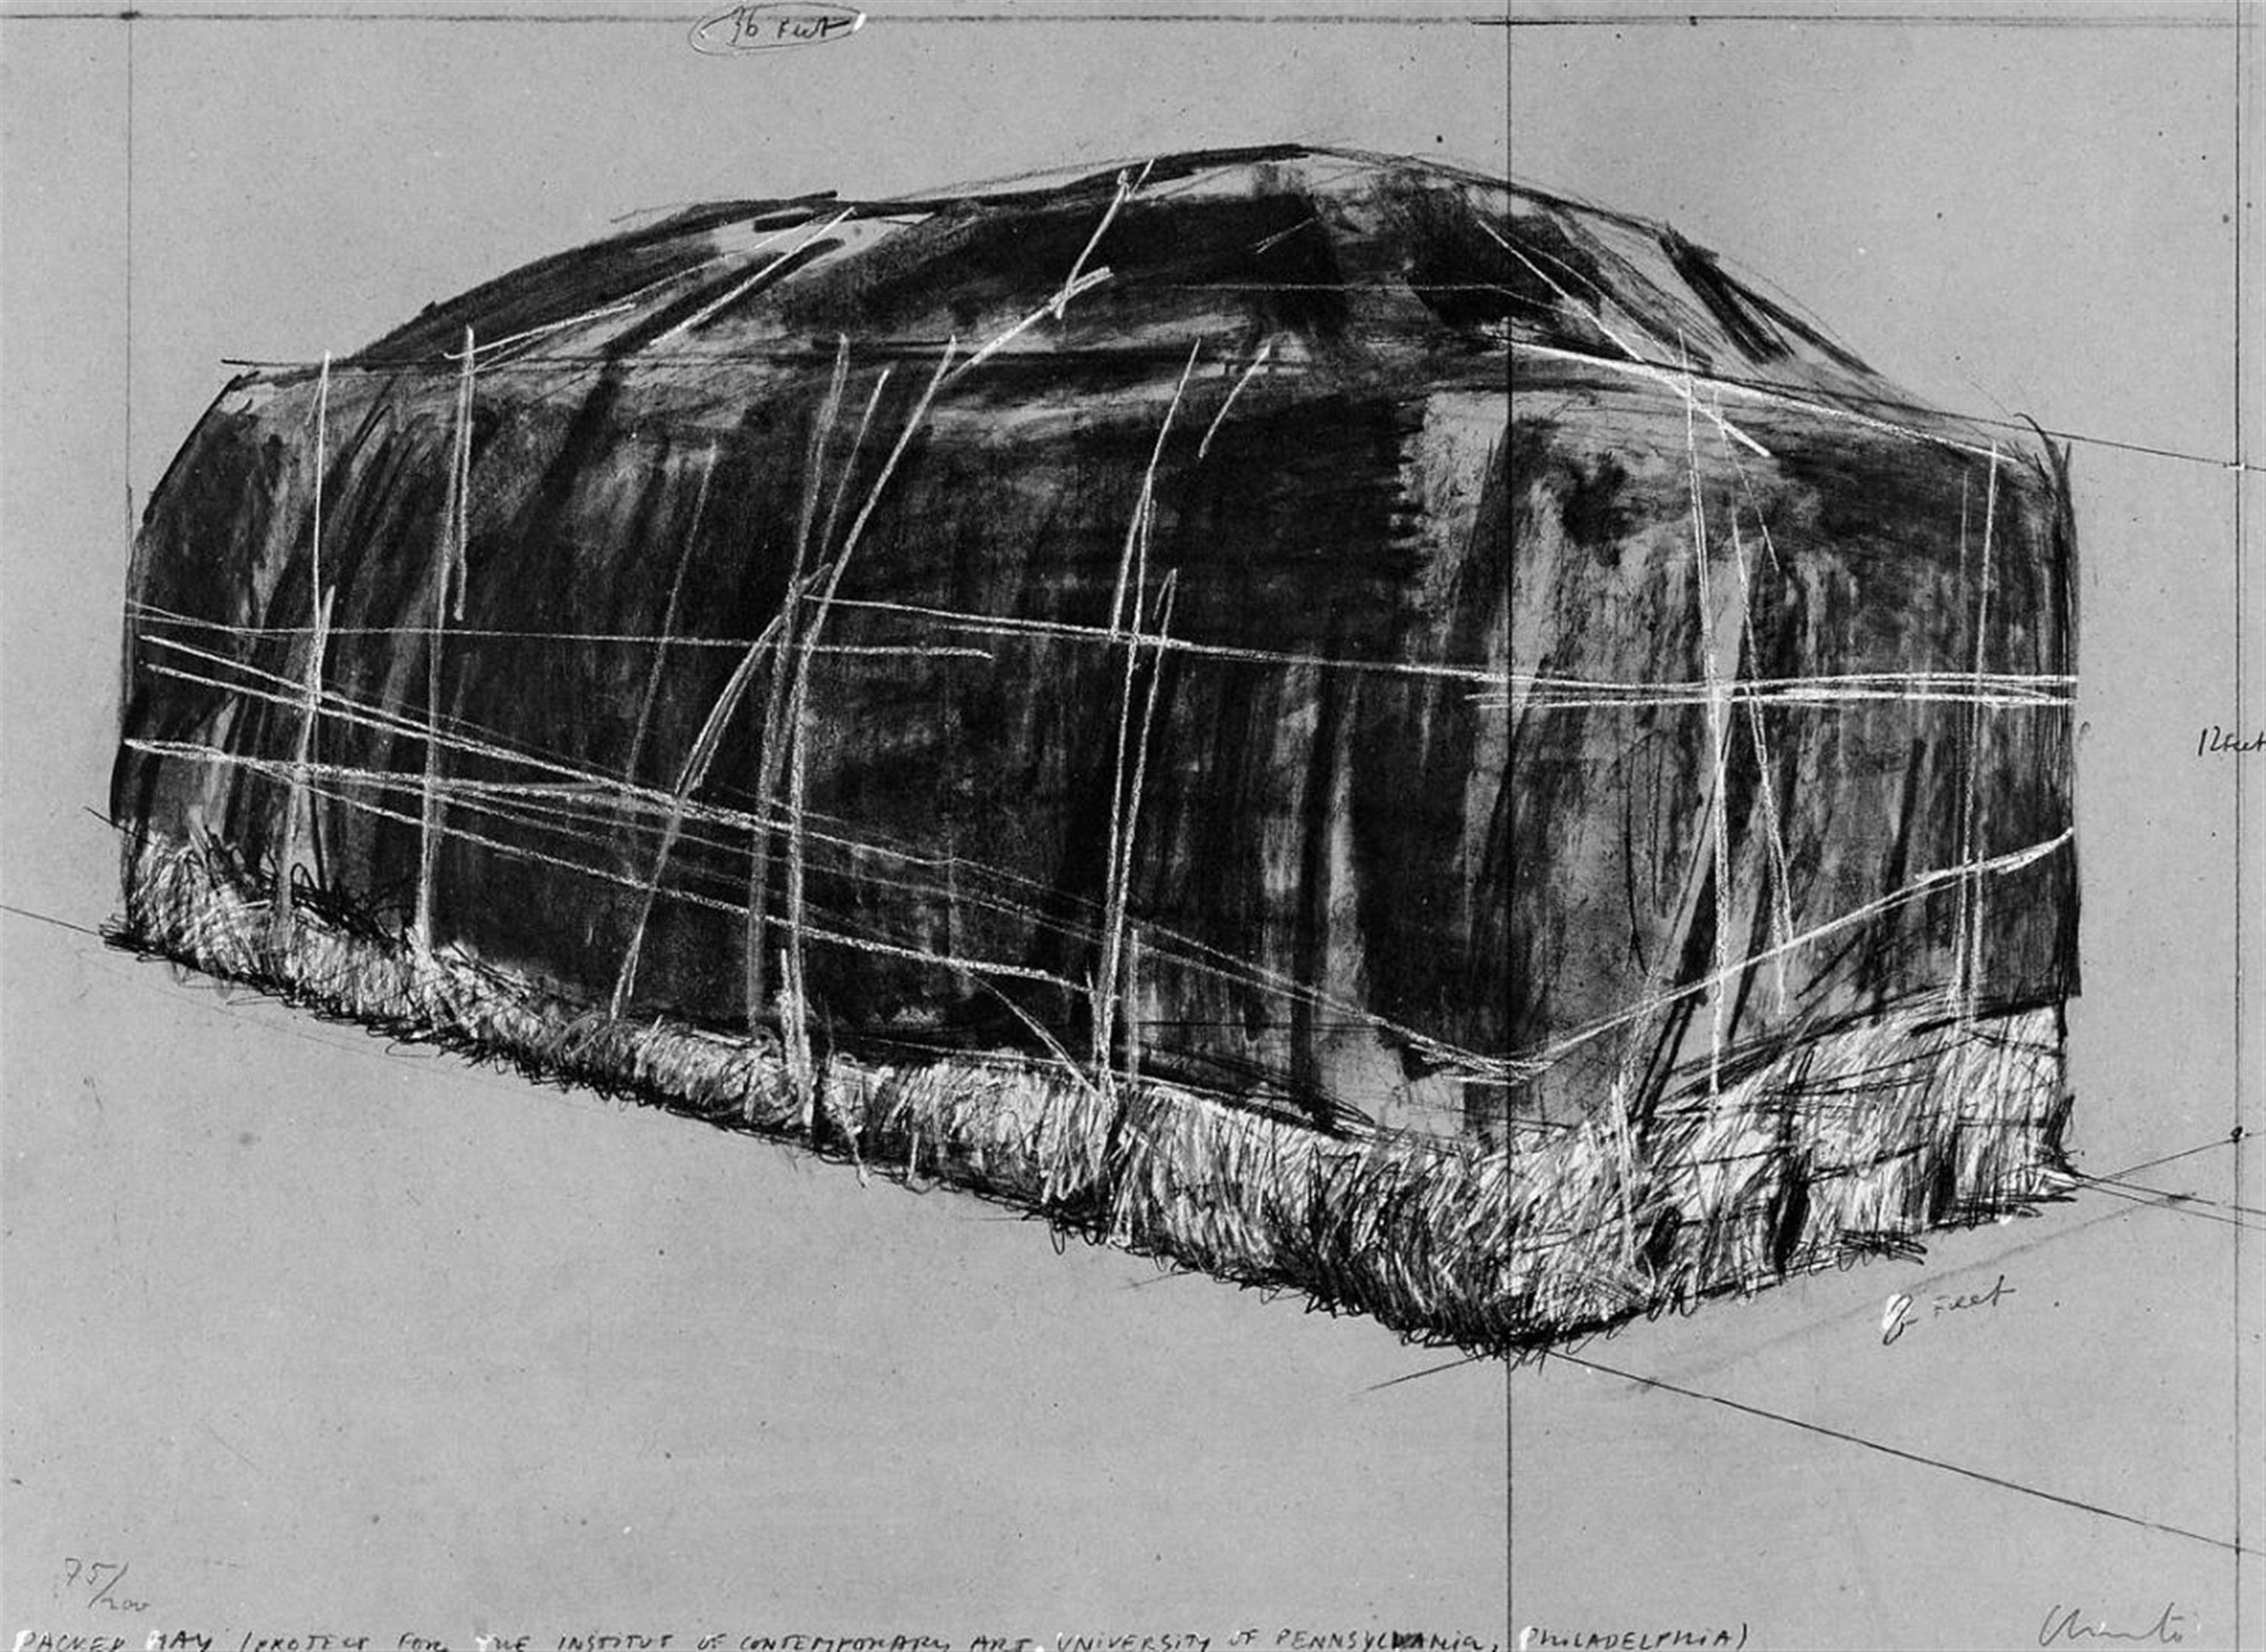 Christo - Packed Hay (Project for the Institute of Contemporary Art, Philadelphia) - image-1